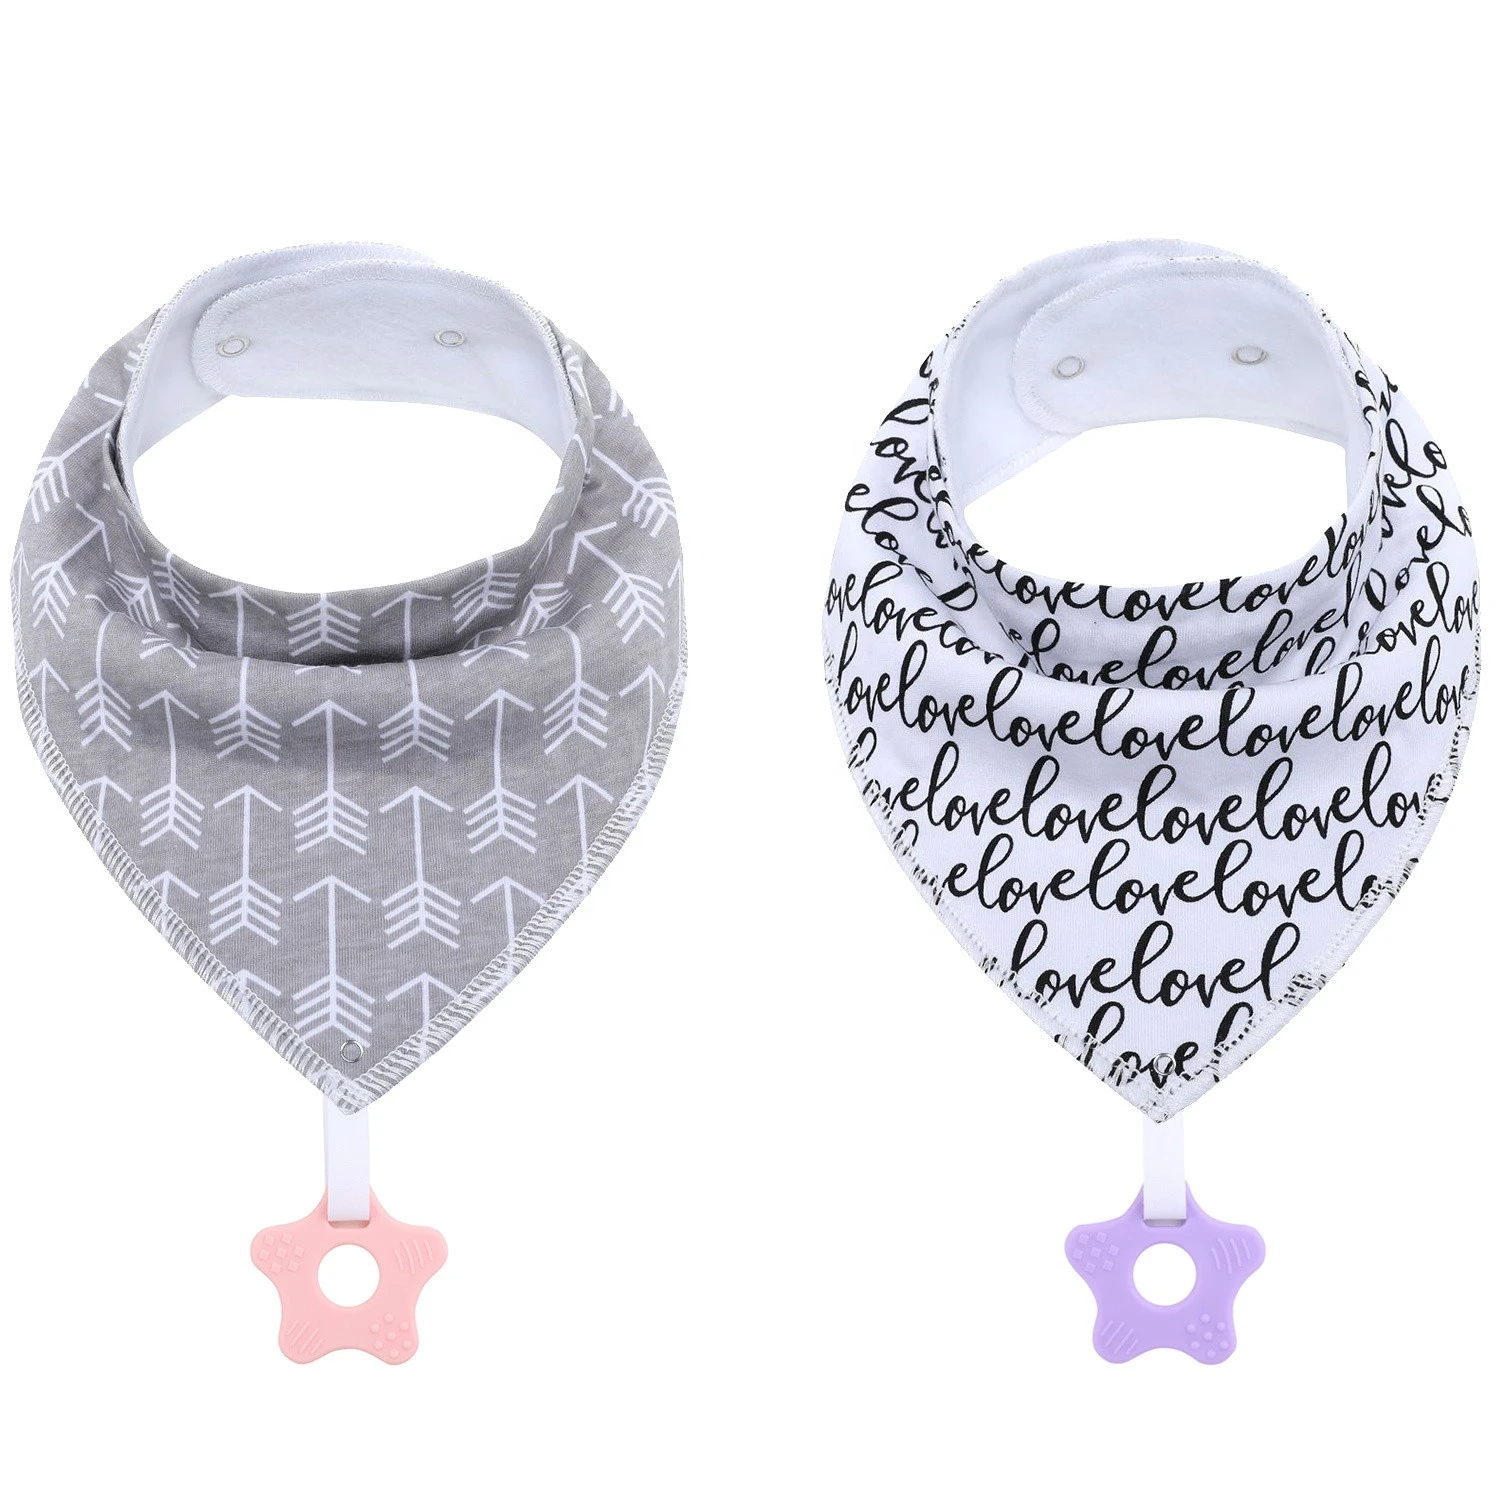 100% Organic Cotton Baby Bandana Drool Bibs and Teething Toys Super Absorbent and Soft Unisex Newborn Baby Bibs